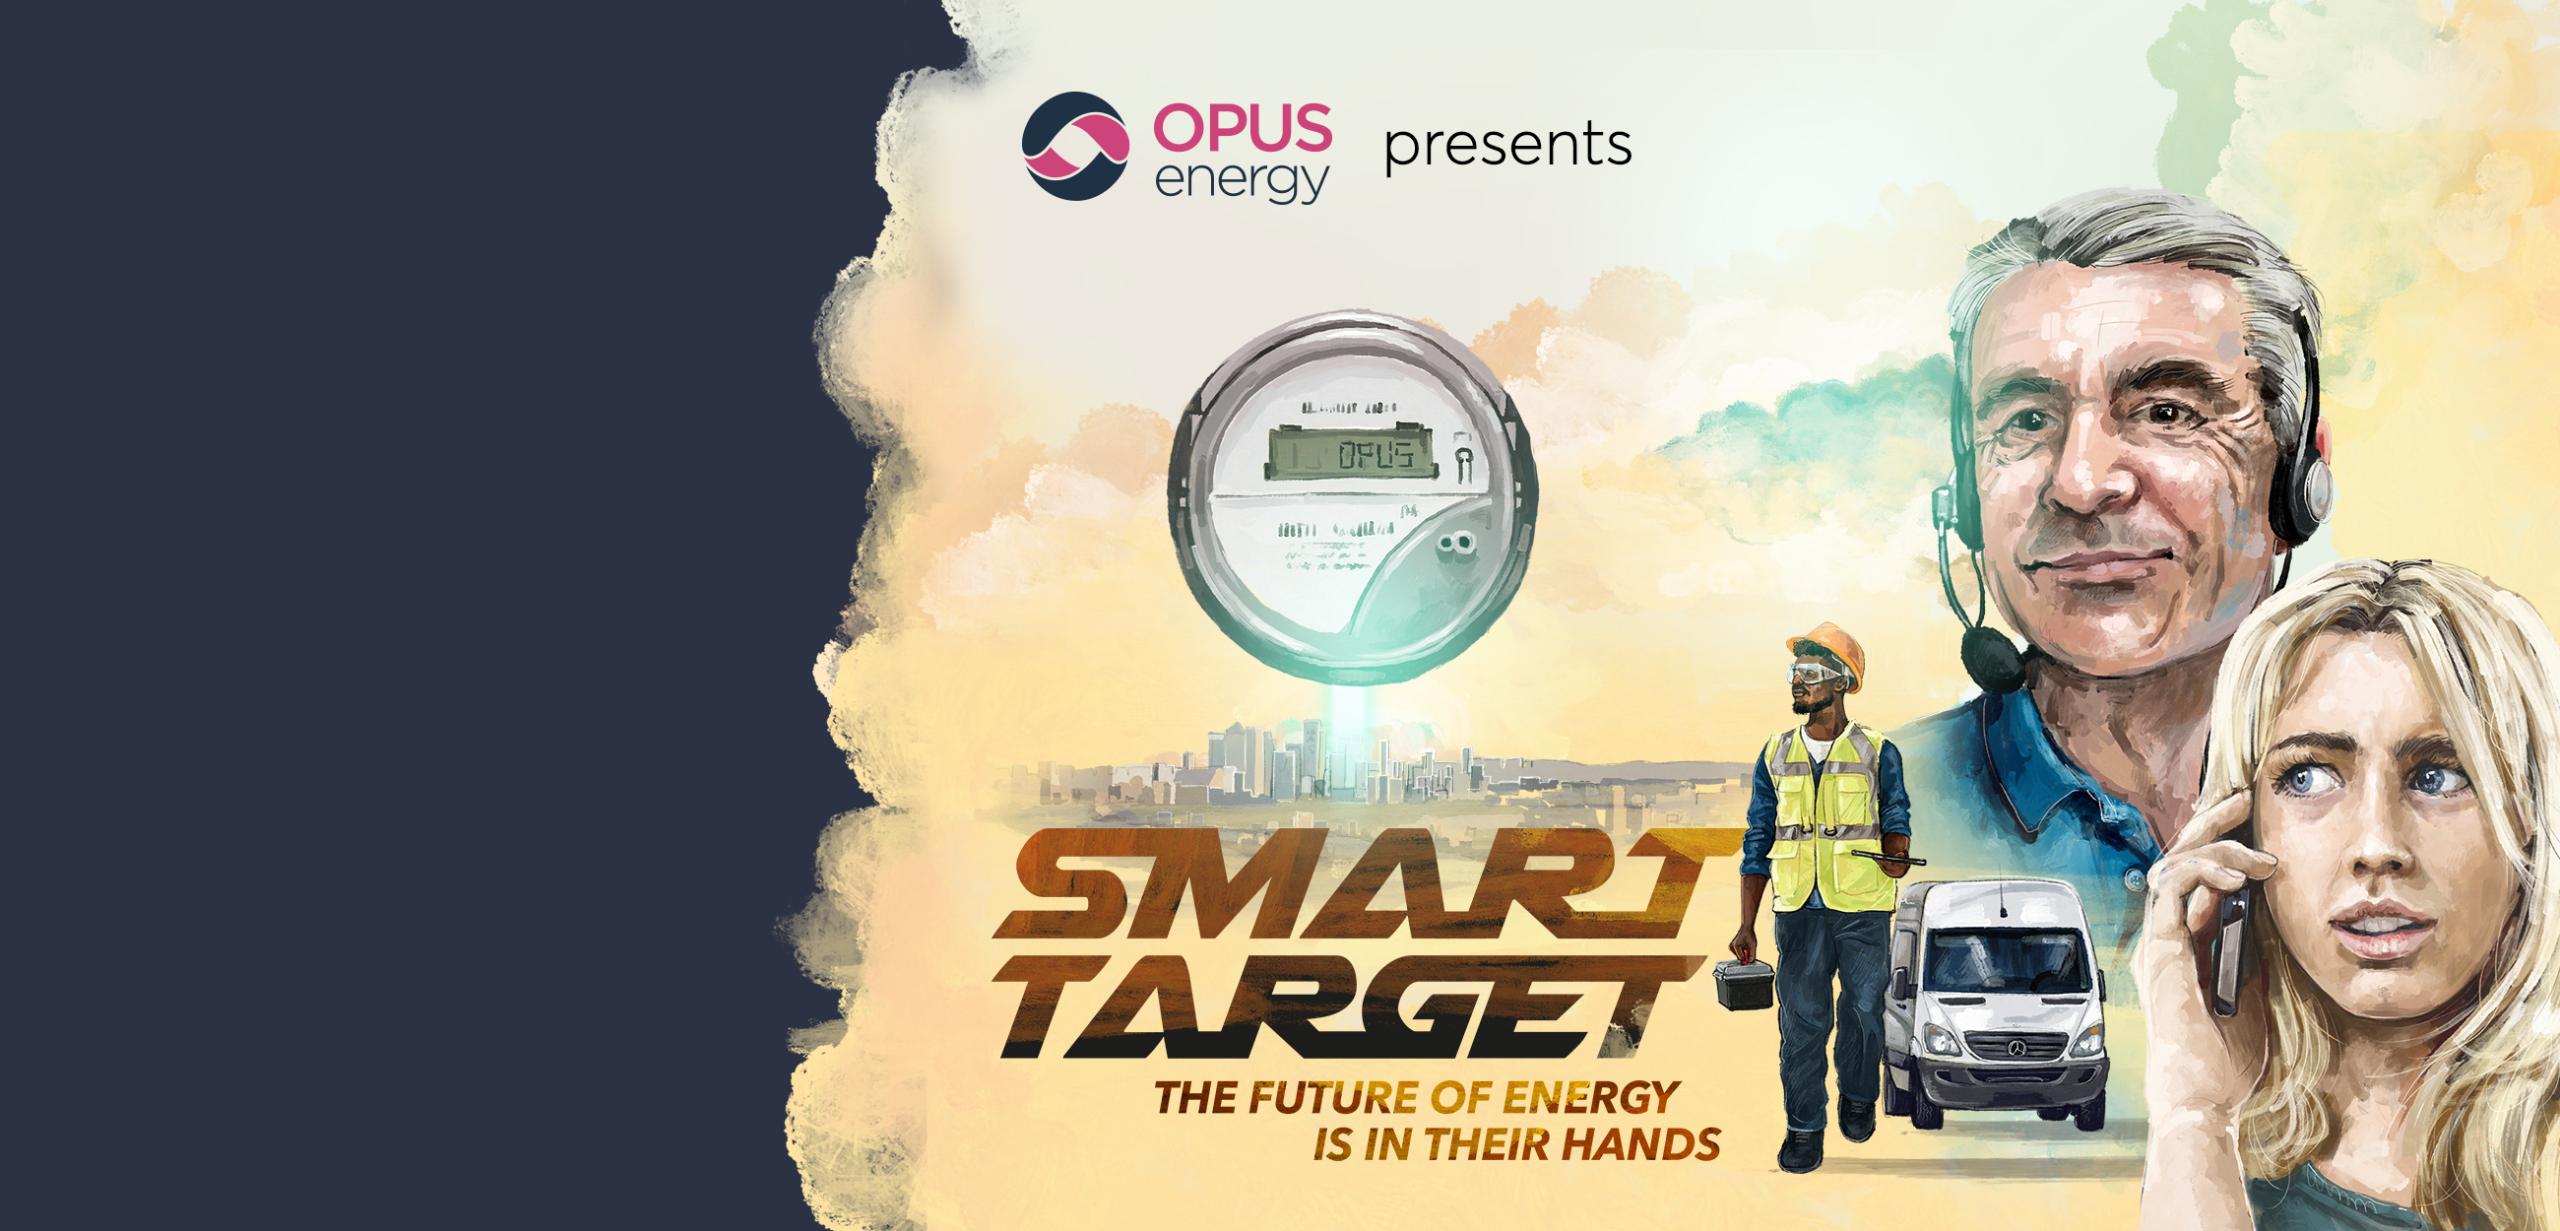 movie poster style design for opus energy